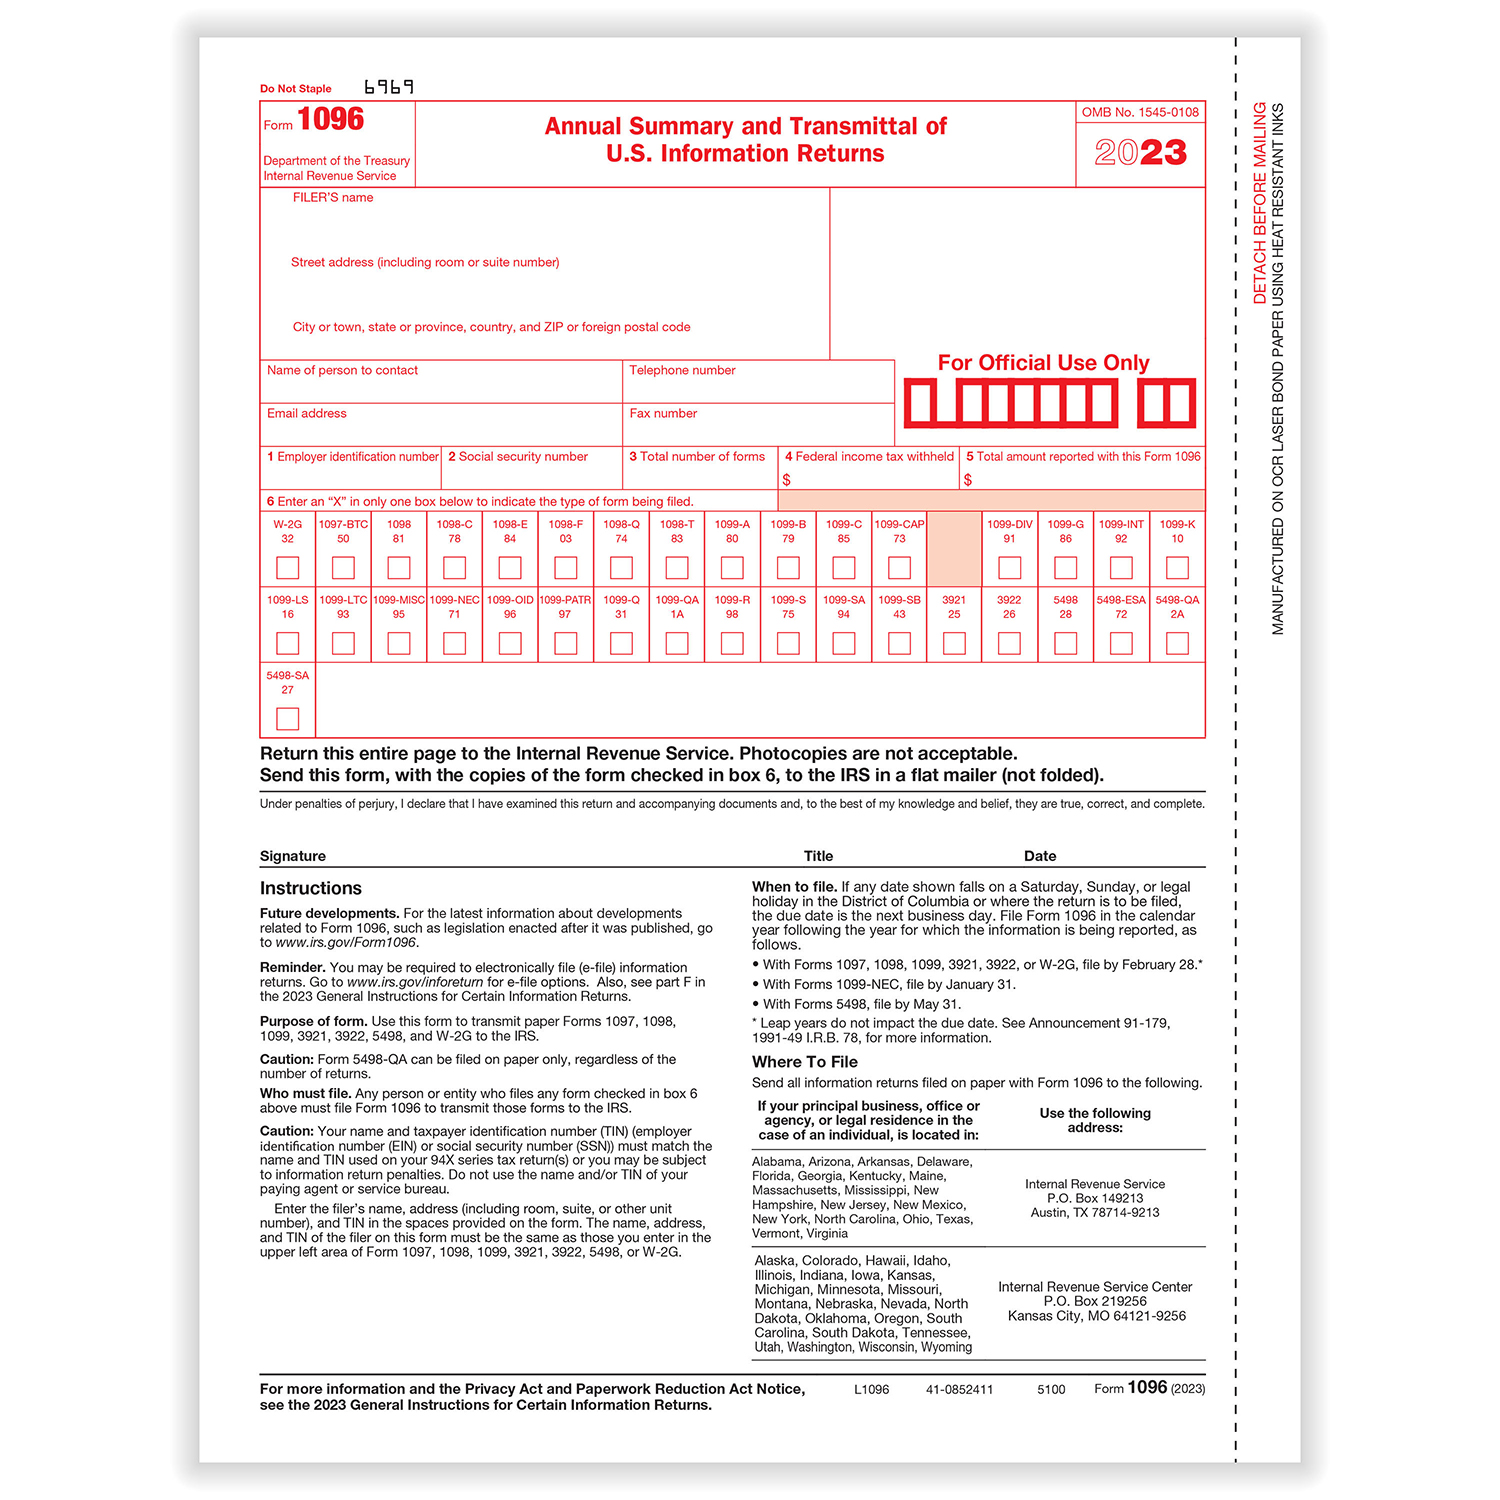 Picture of 1096 Transmittal & Annual Summary Form (Bulk)